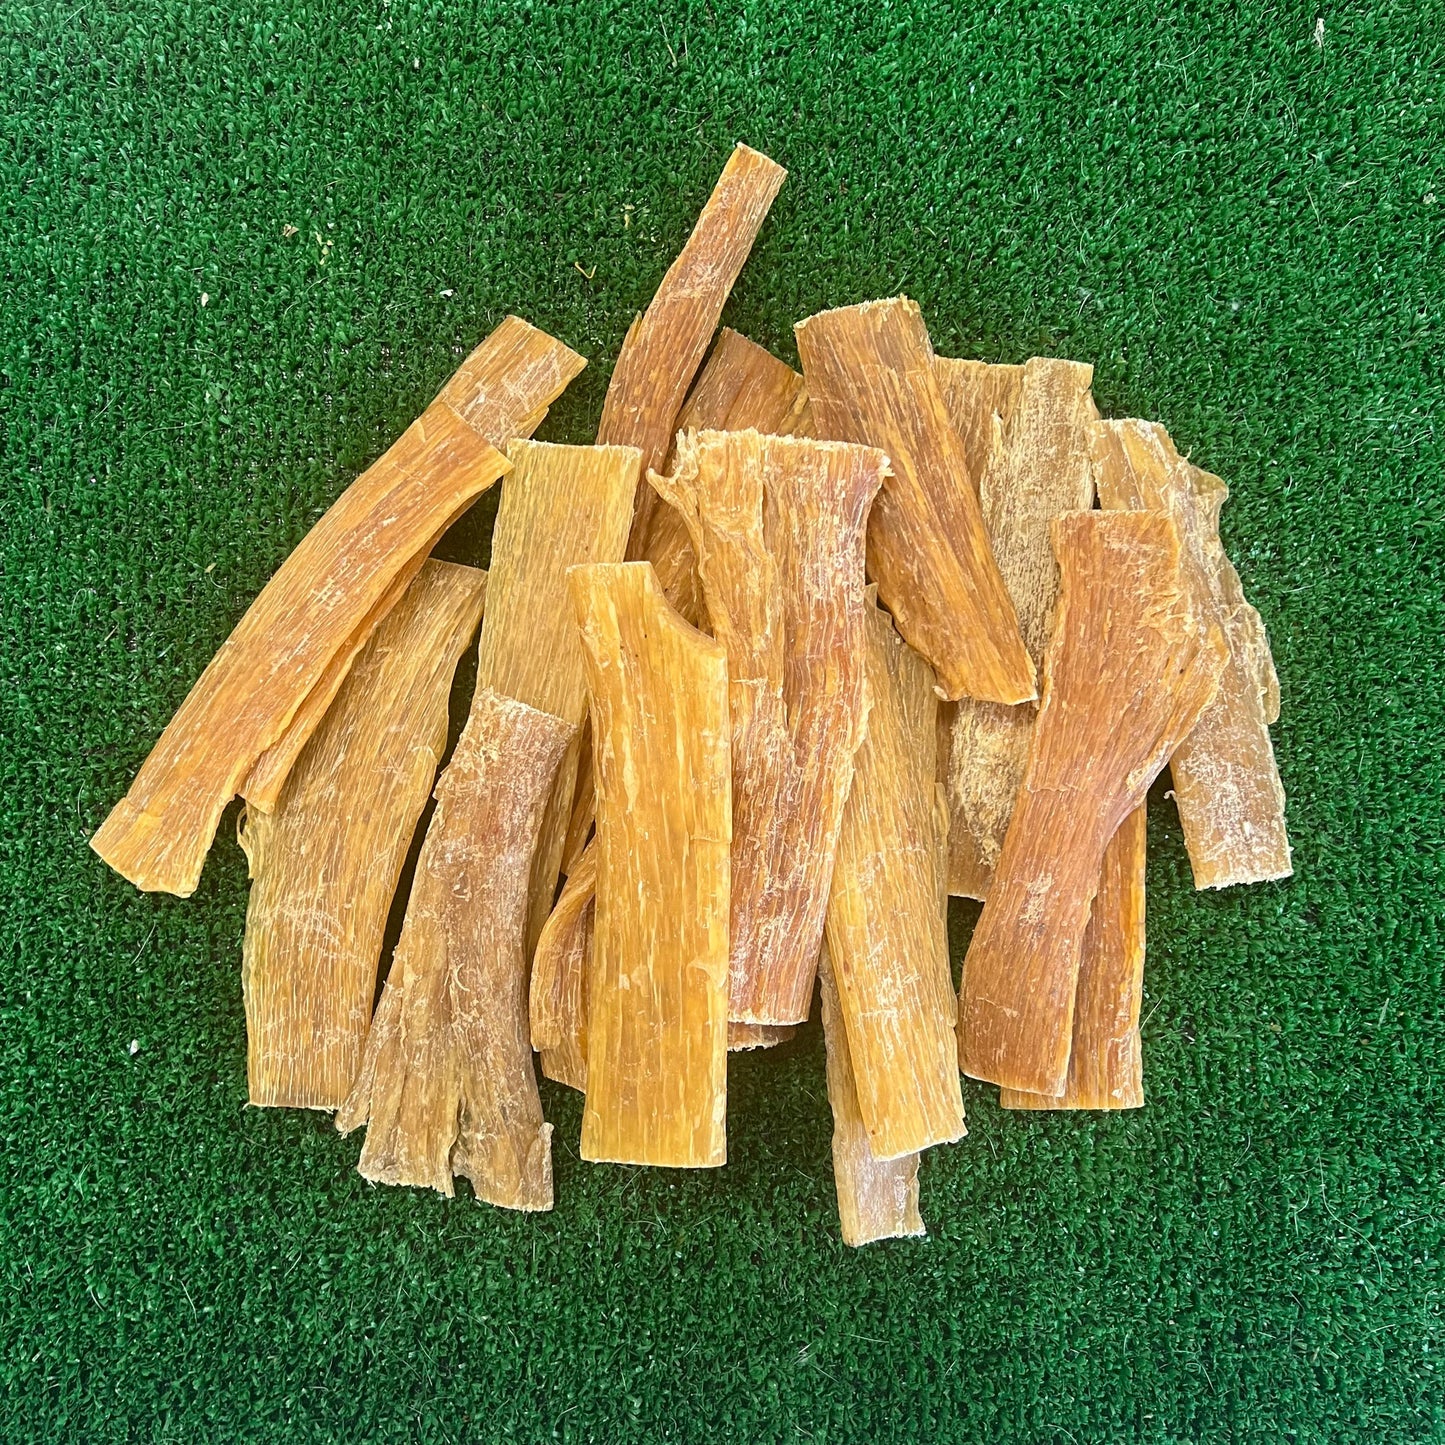 20 x Paddy Whack - 100% natural, free from raw hide & any hidden nasties.